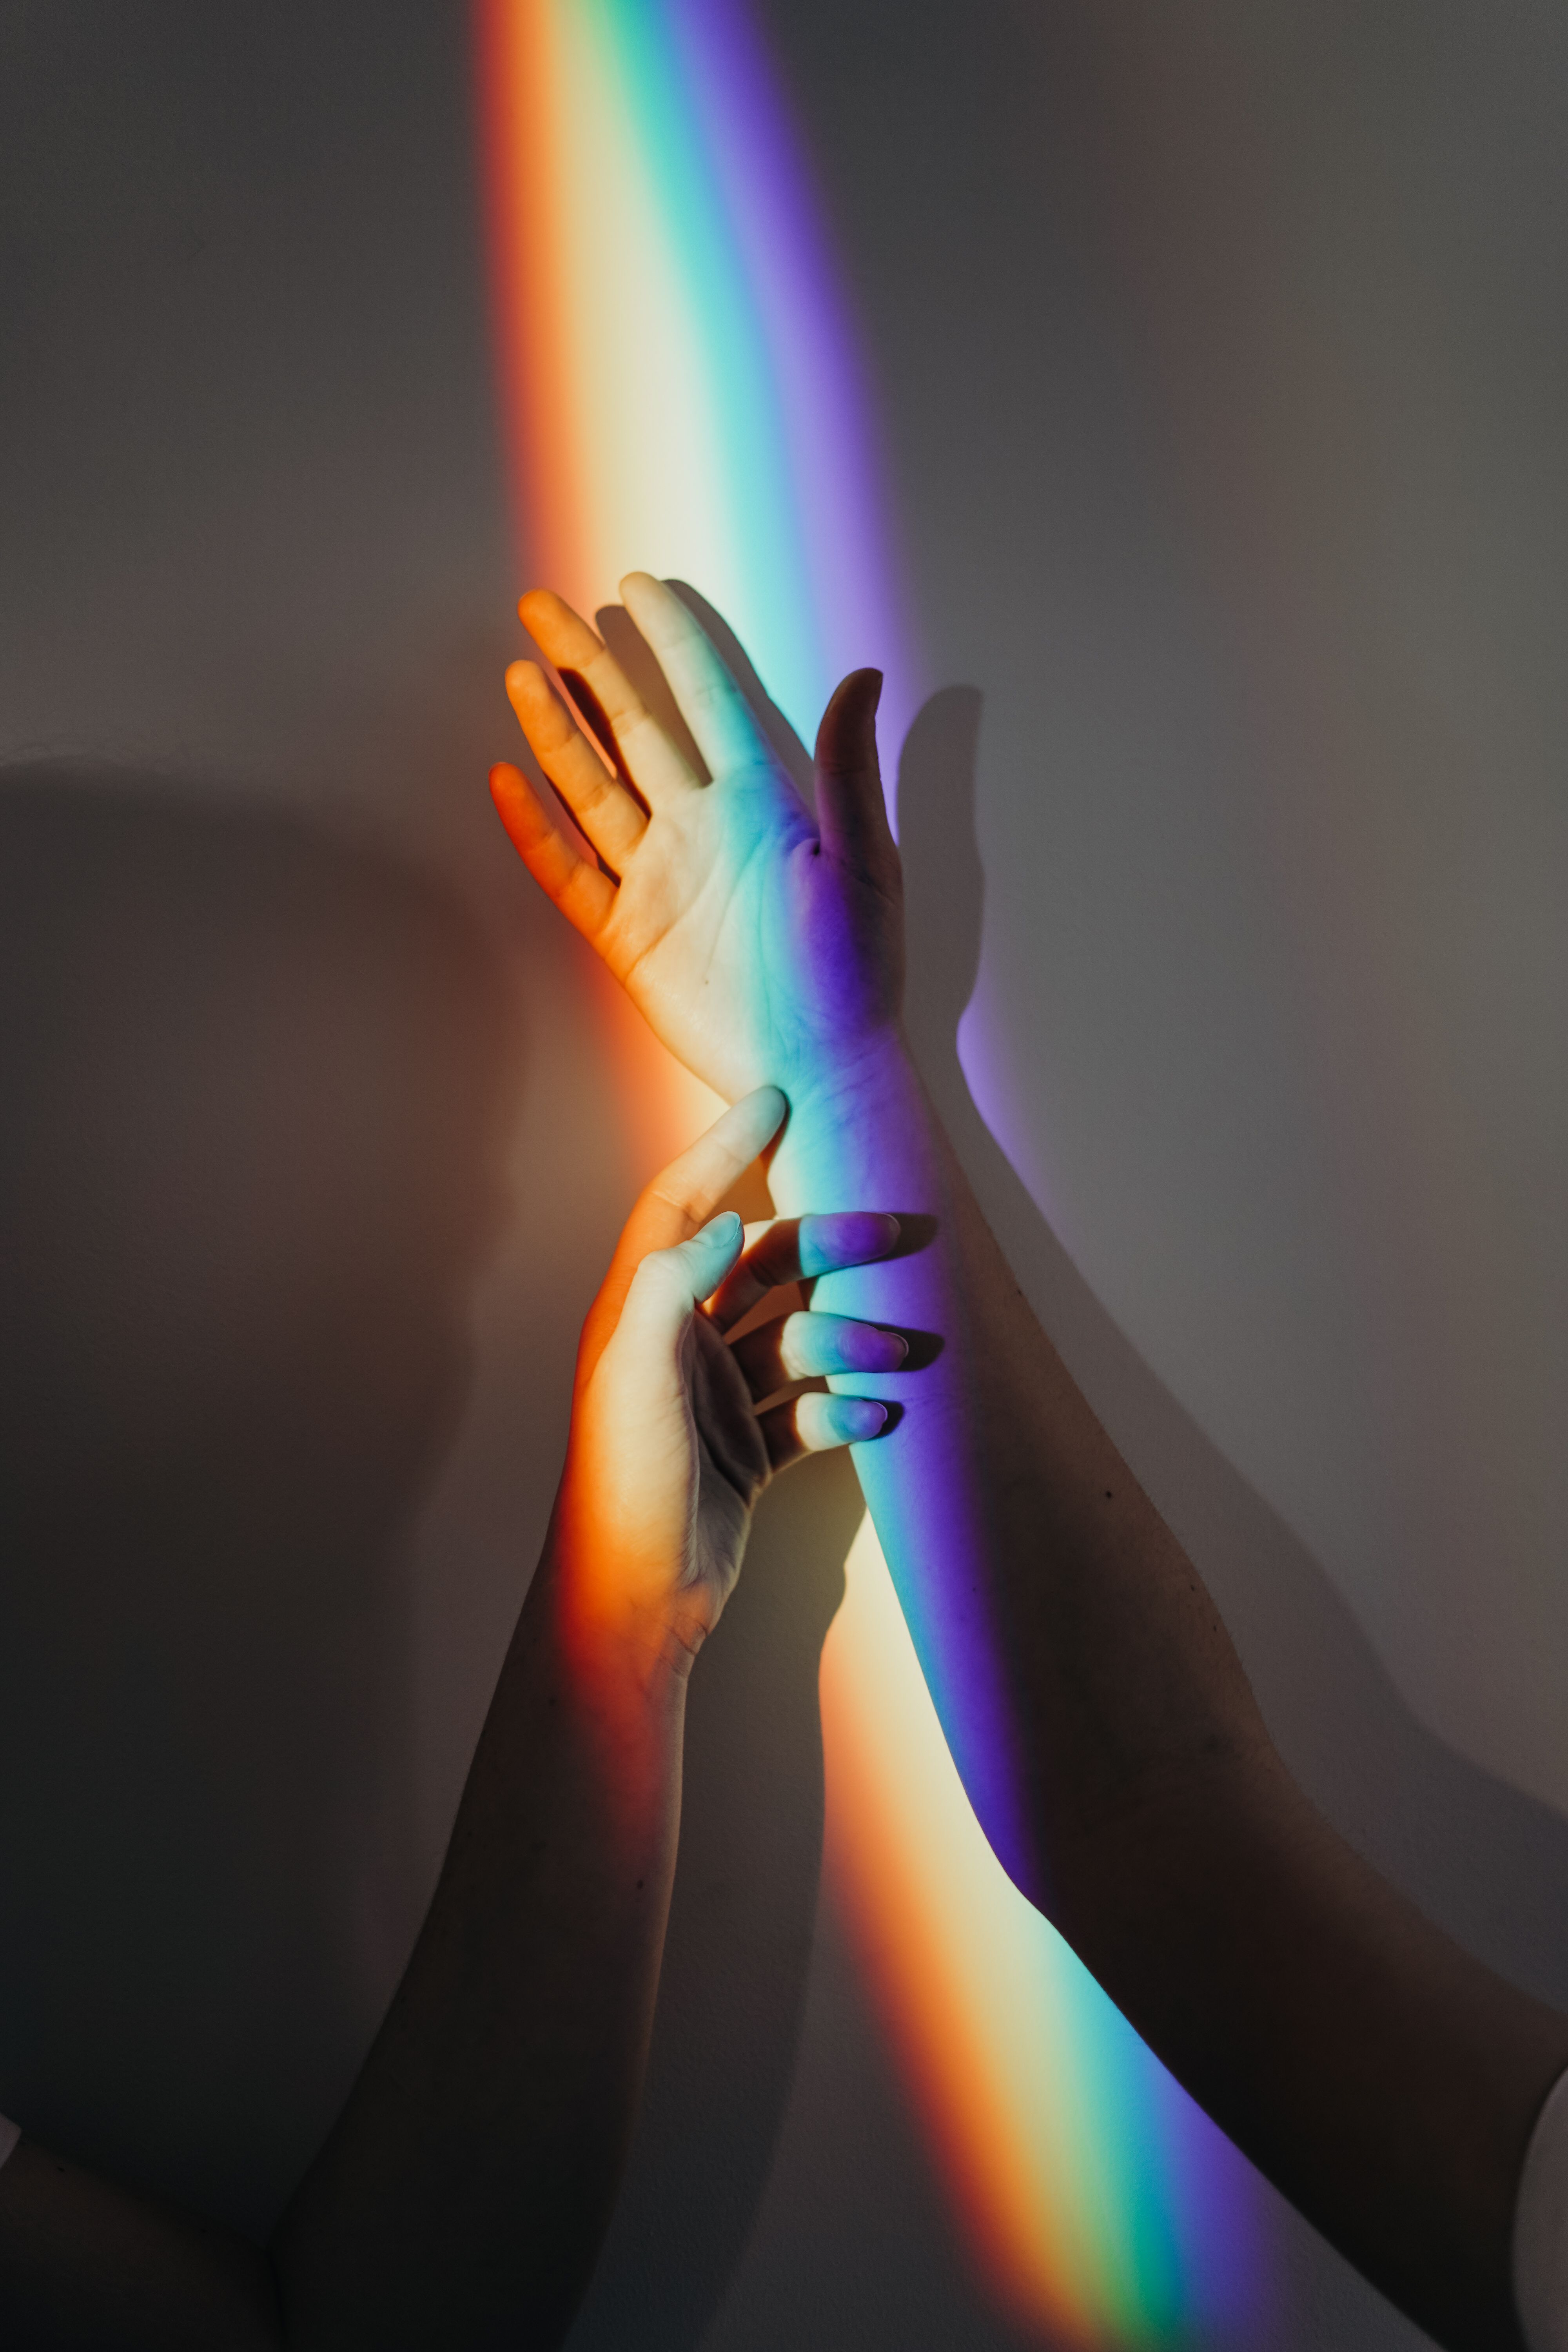 A person holding their hand up to the sun - Pride, rainbows, gay, LGBT